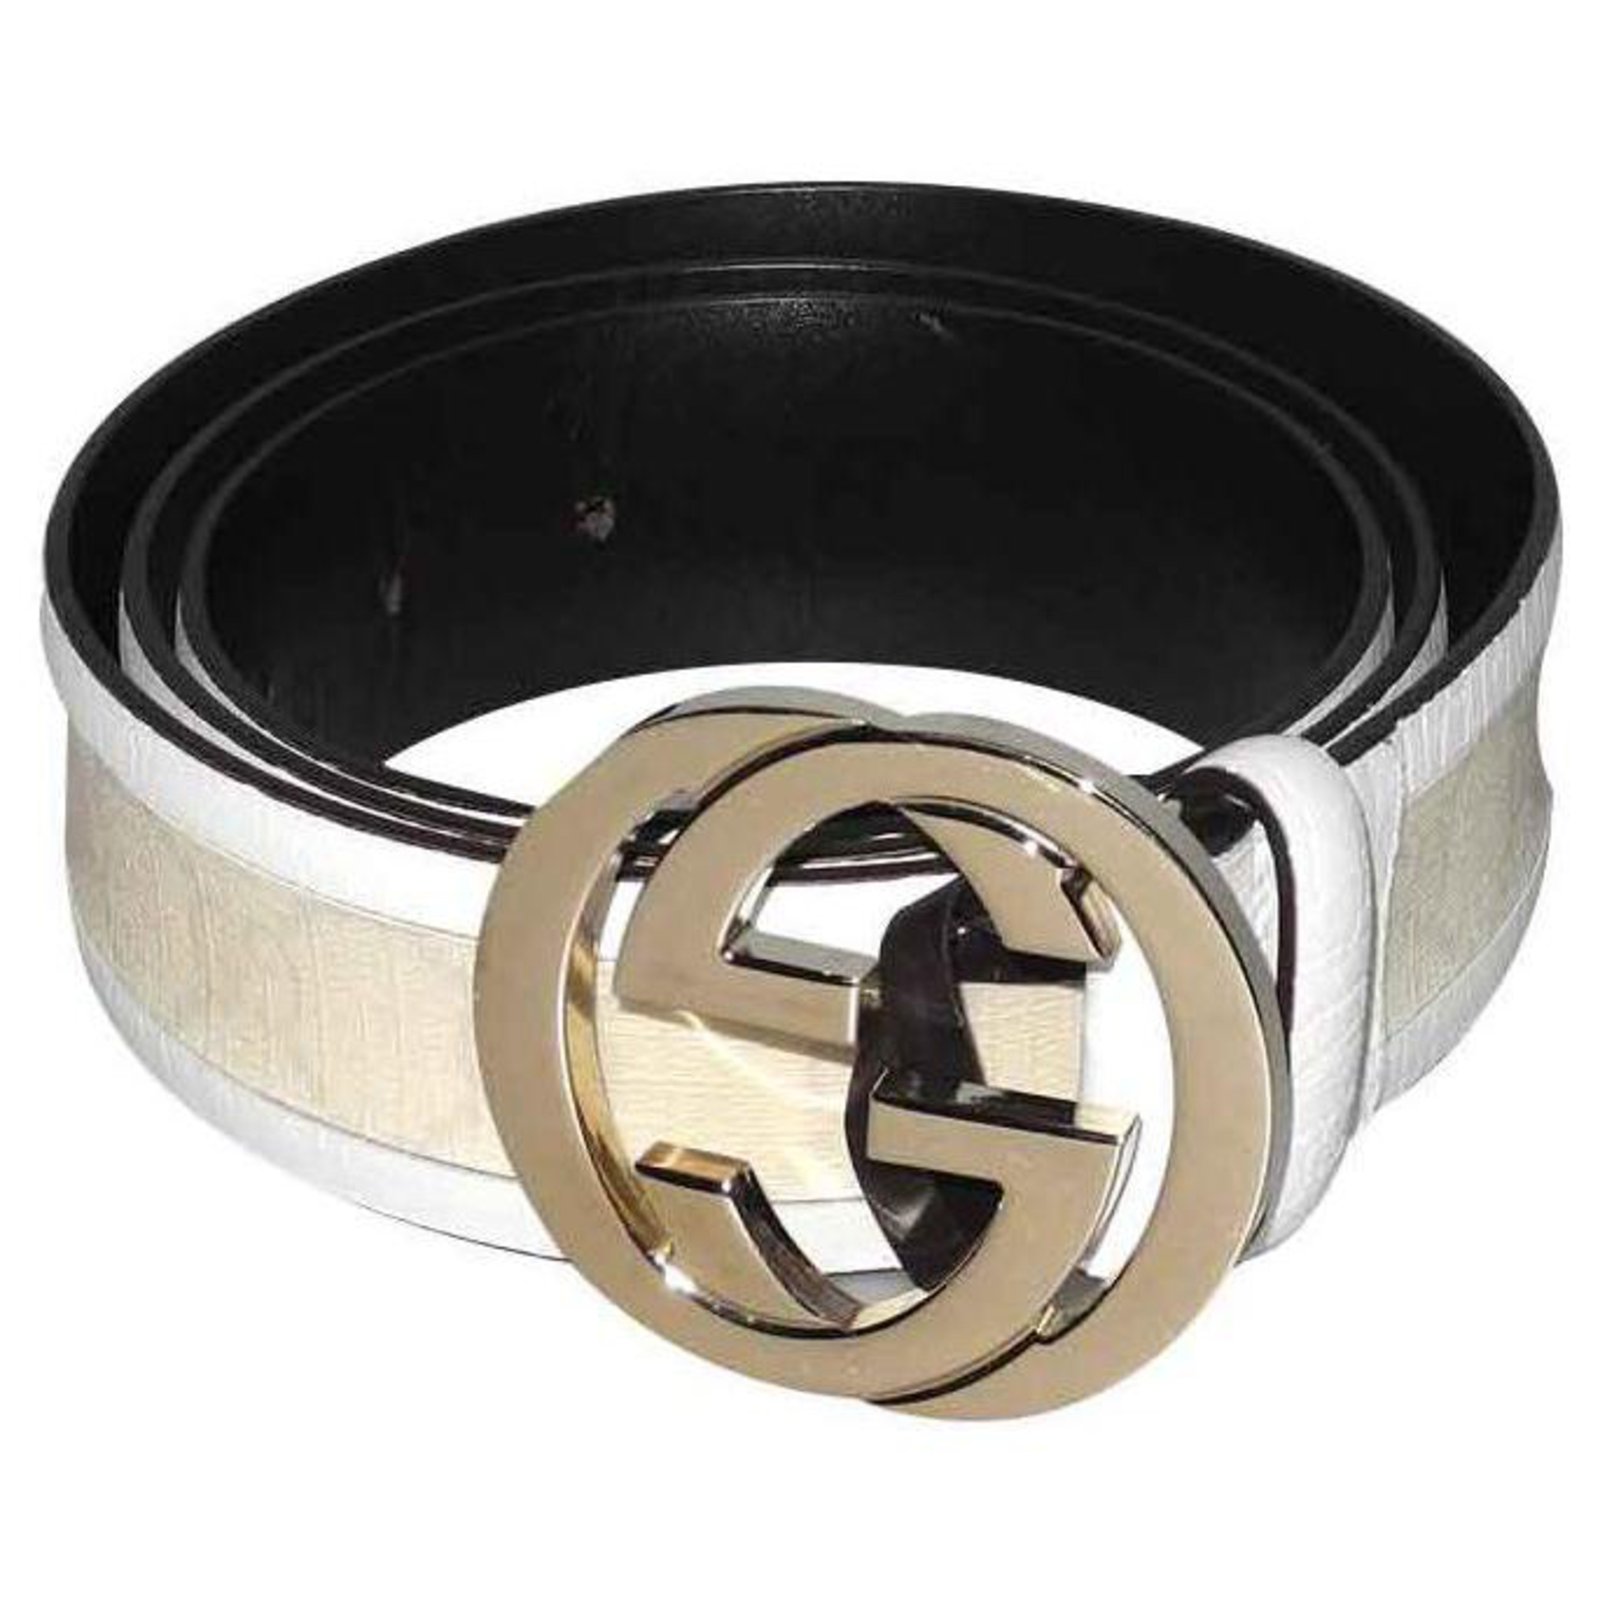 white and silver gucci belt